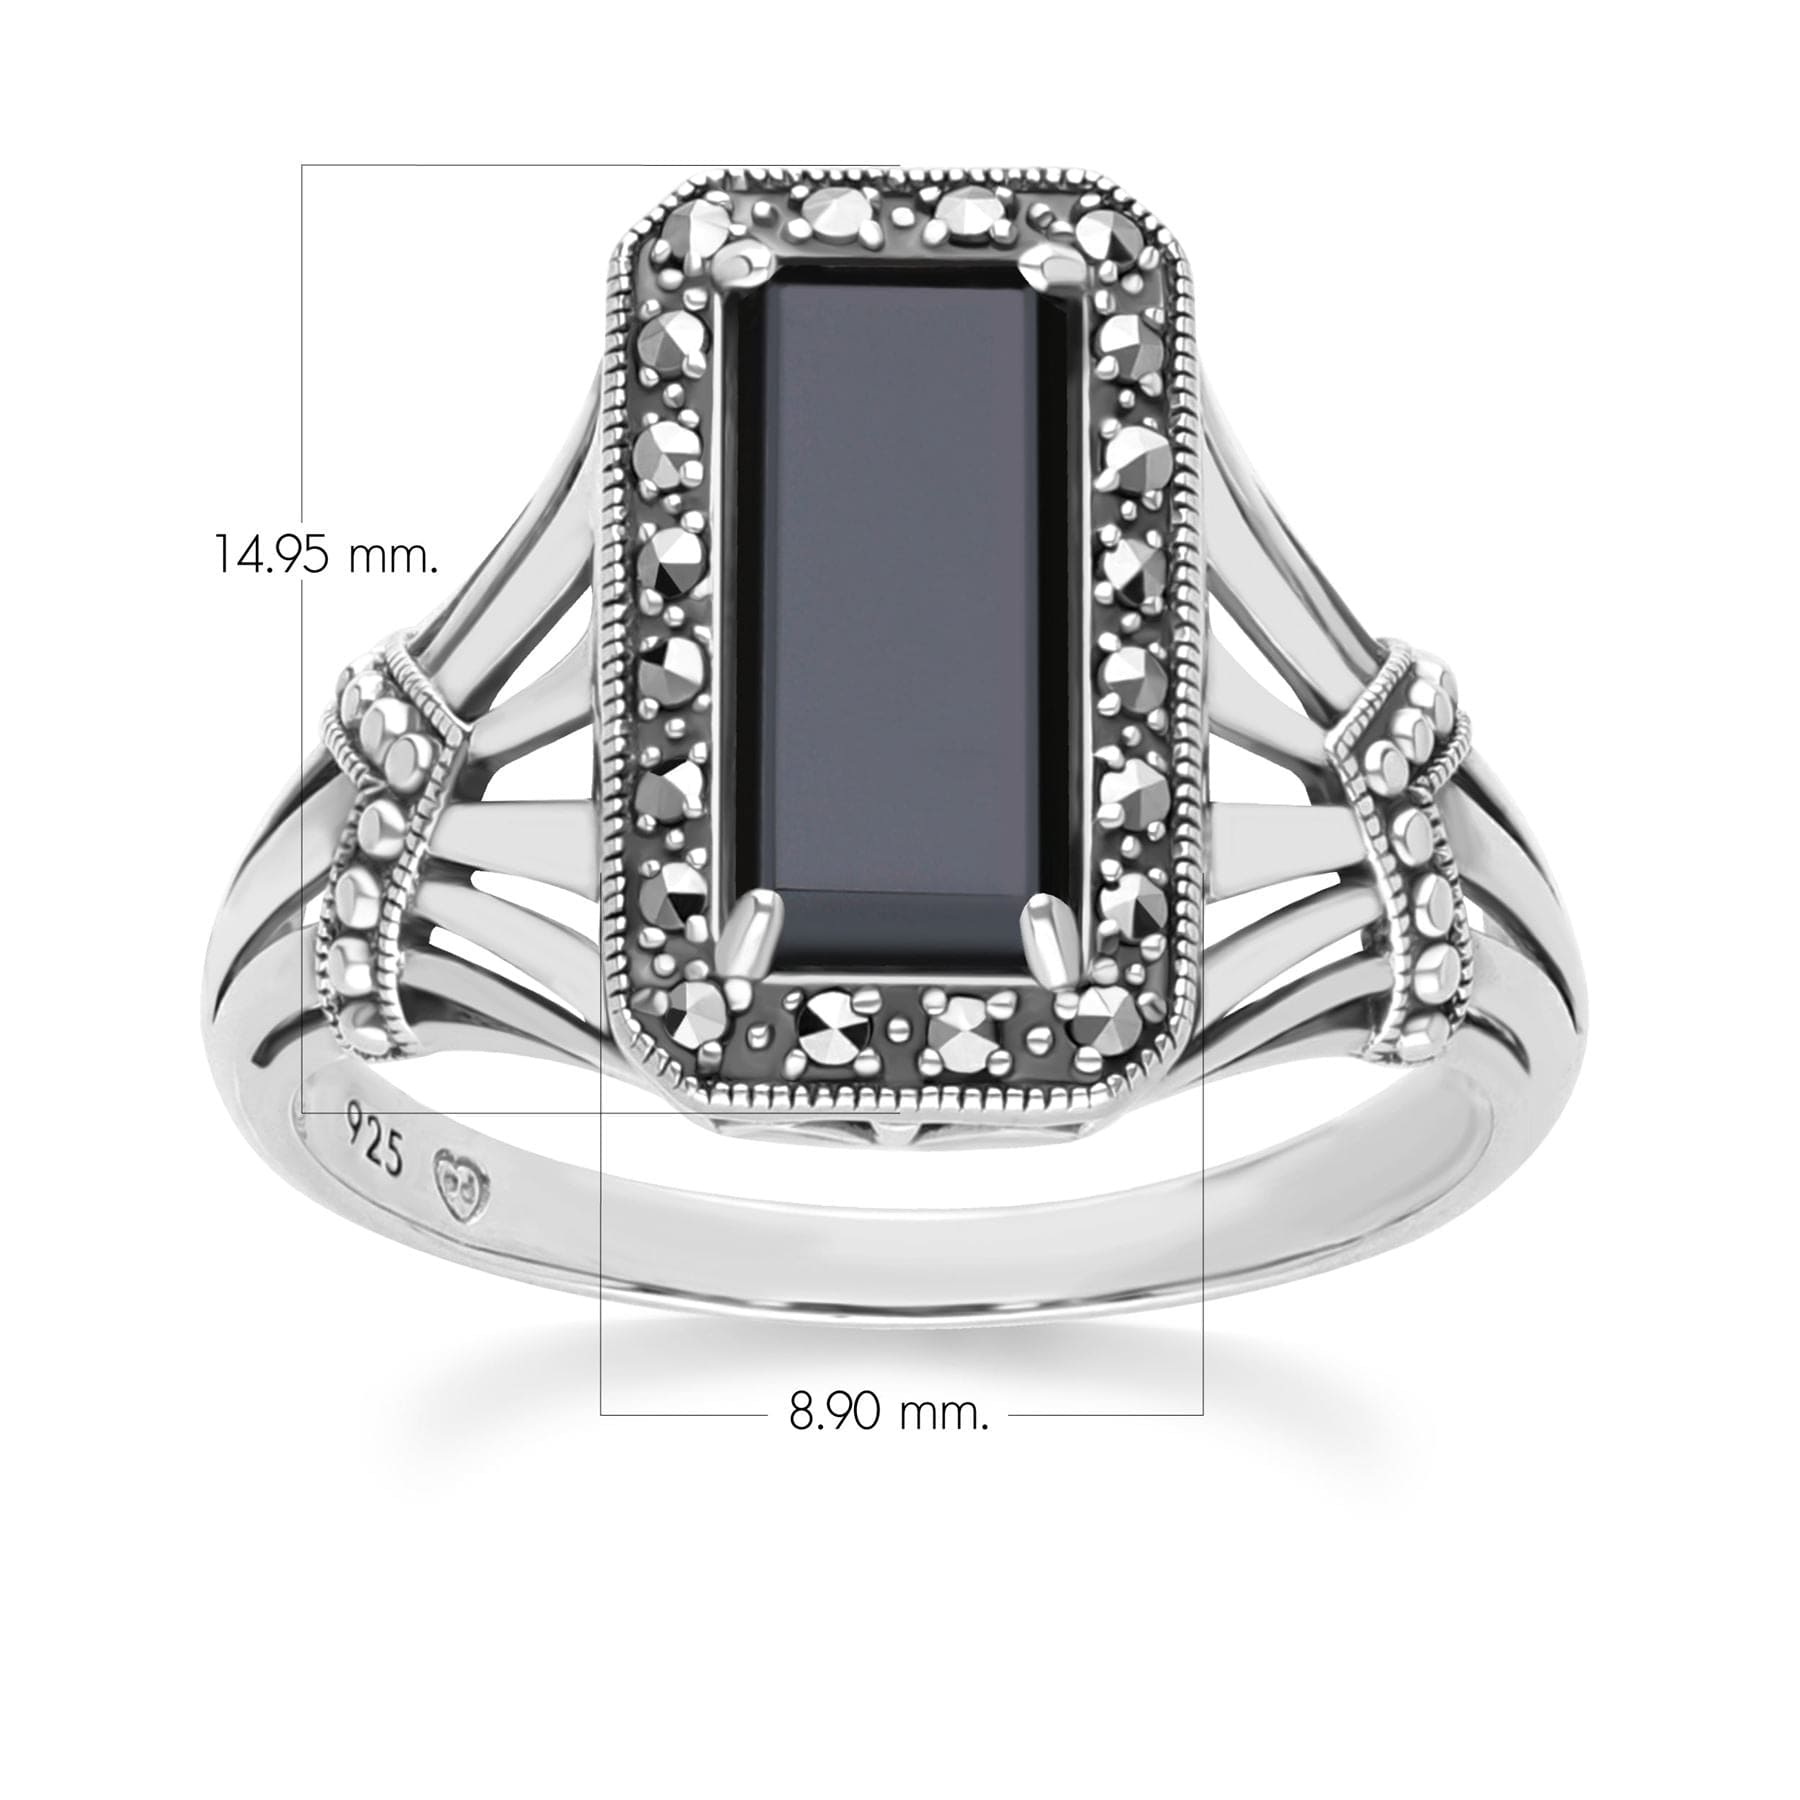 Art Deco Style Octagon Onyx and Marcasite Ring in Sterling Silver 214R642001925 Dimensions